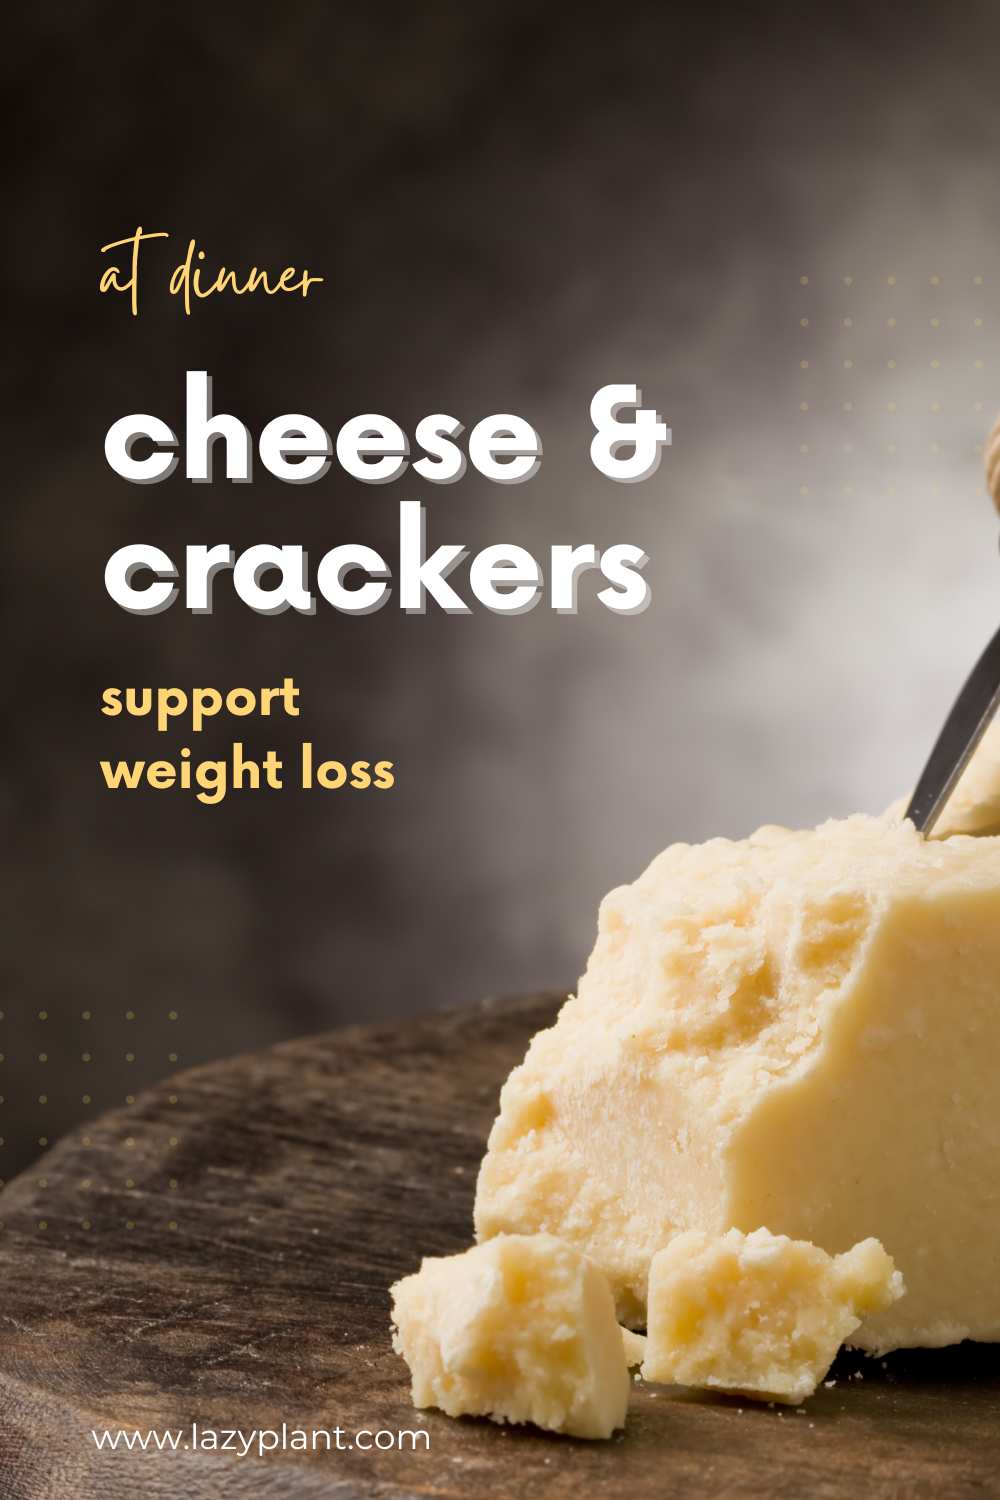 Can I eat cheese and crackers before bed if I’m on a diet?